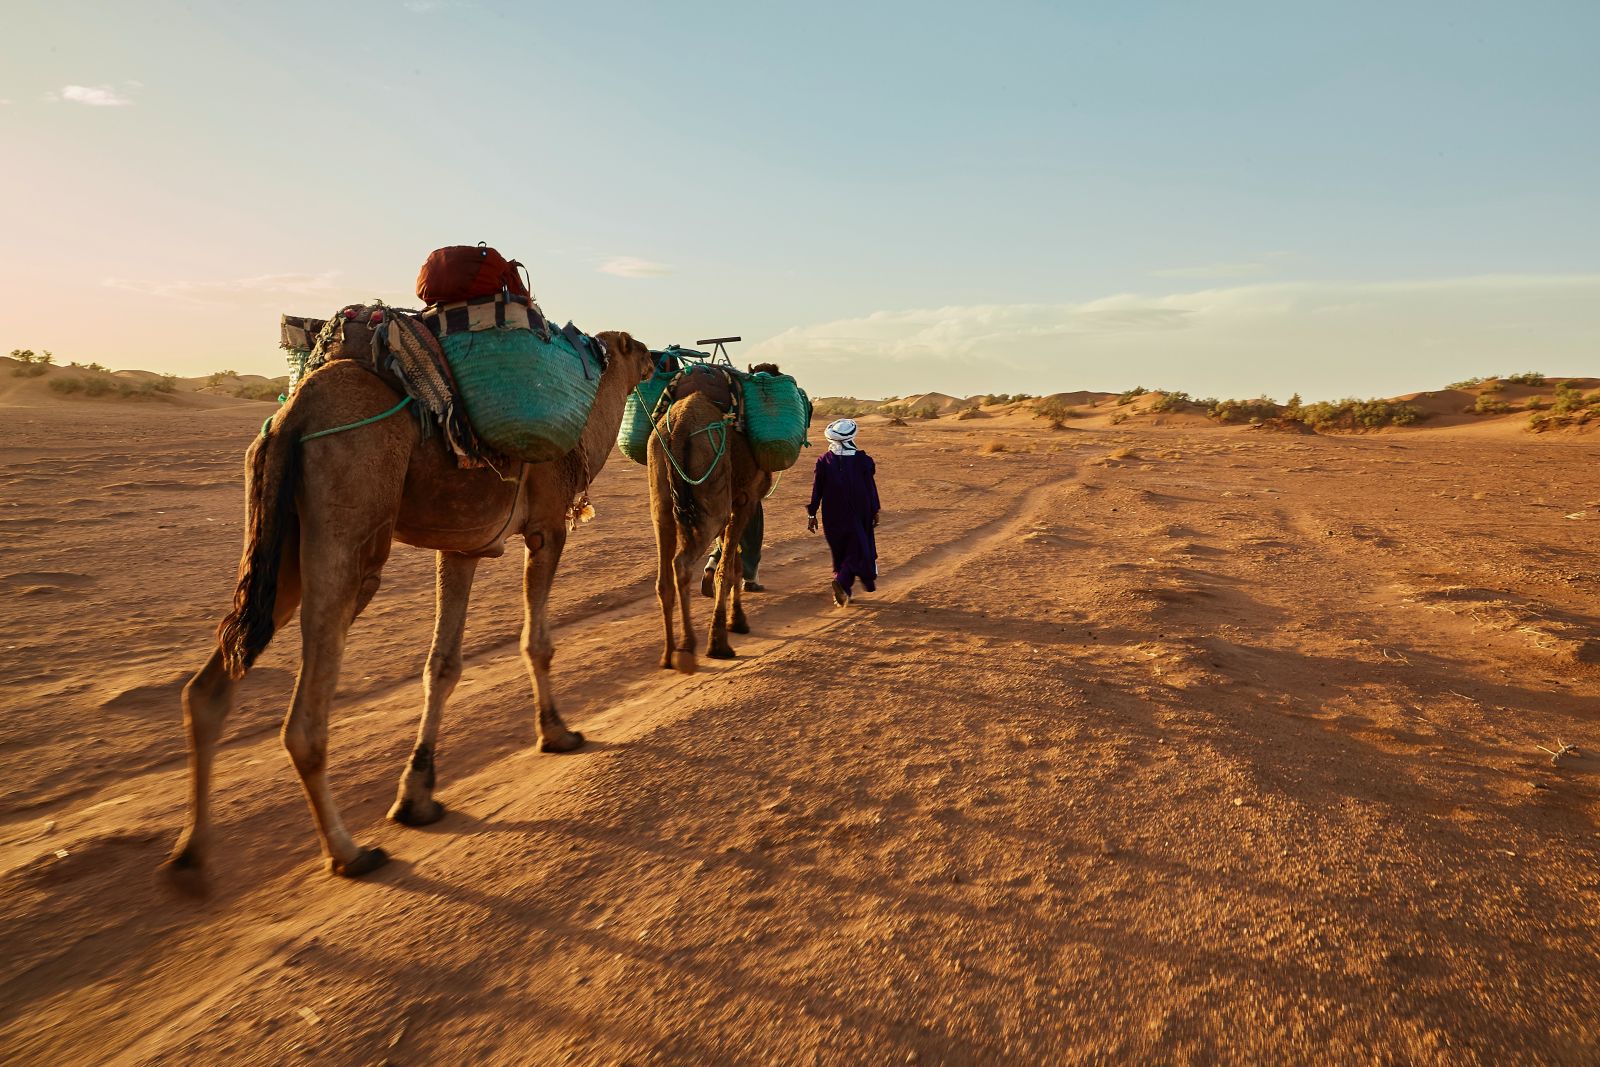 Man leading camels through desert plains in Morocco